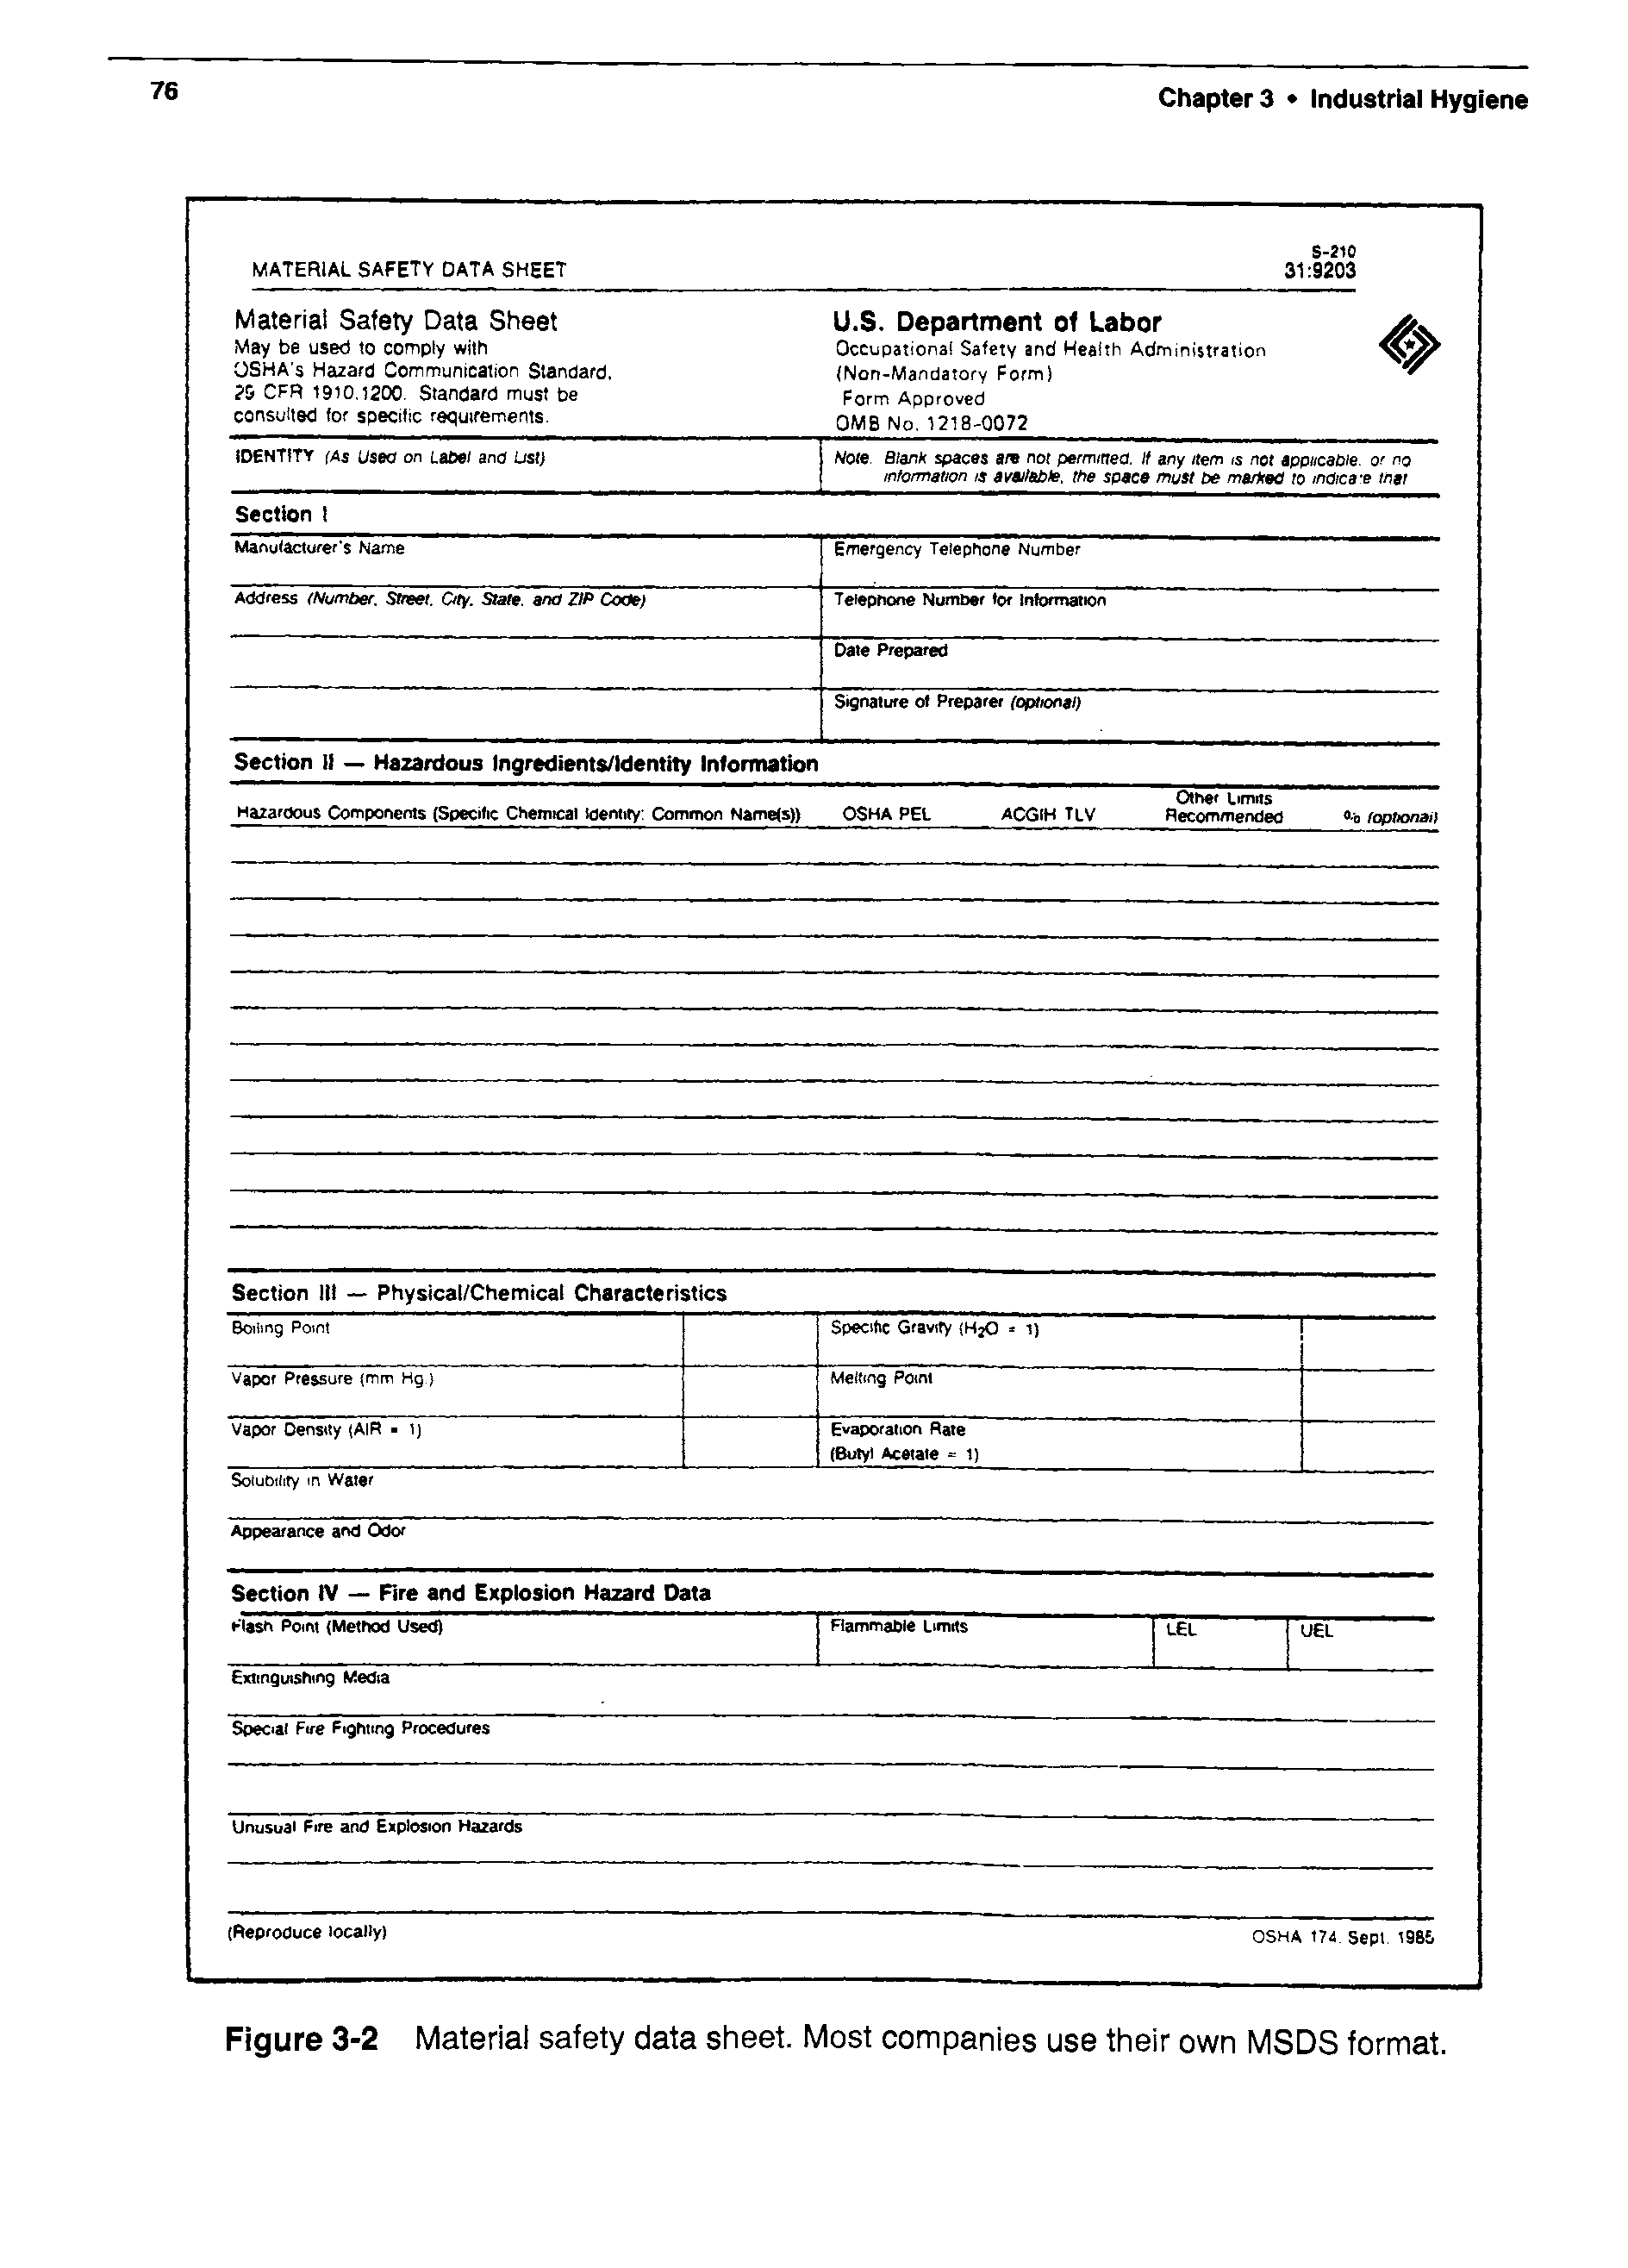 Figure 3-2 Material safety data sheet. Most companies use their own MSDS format.